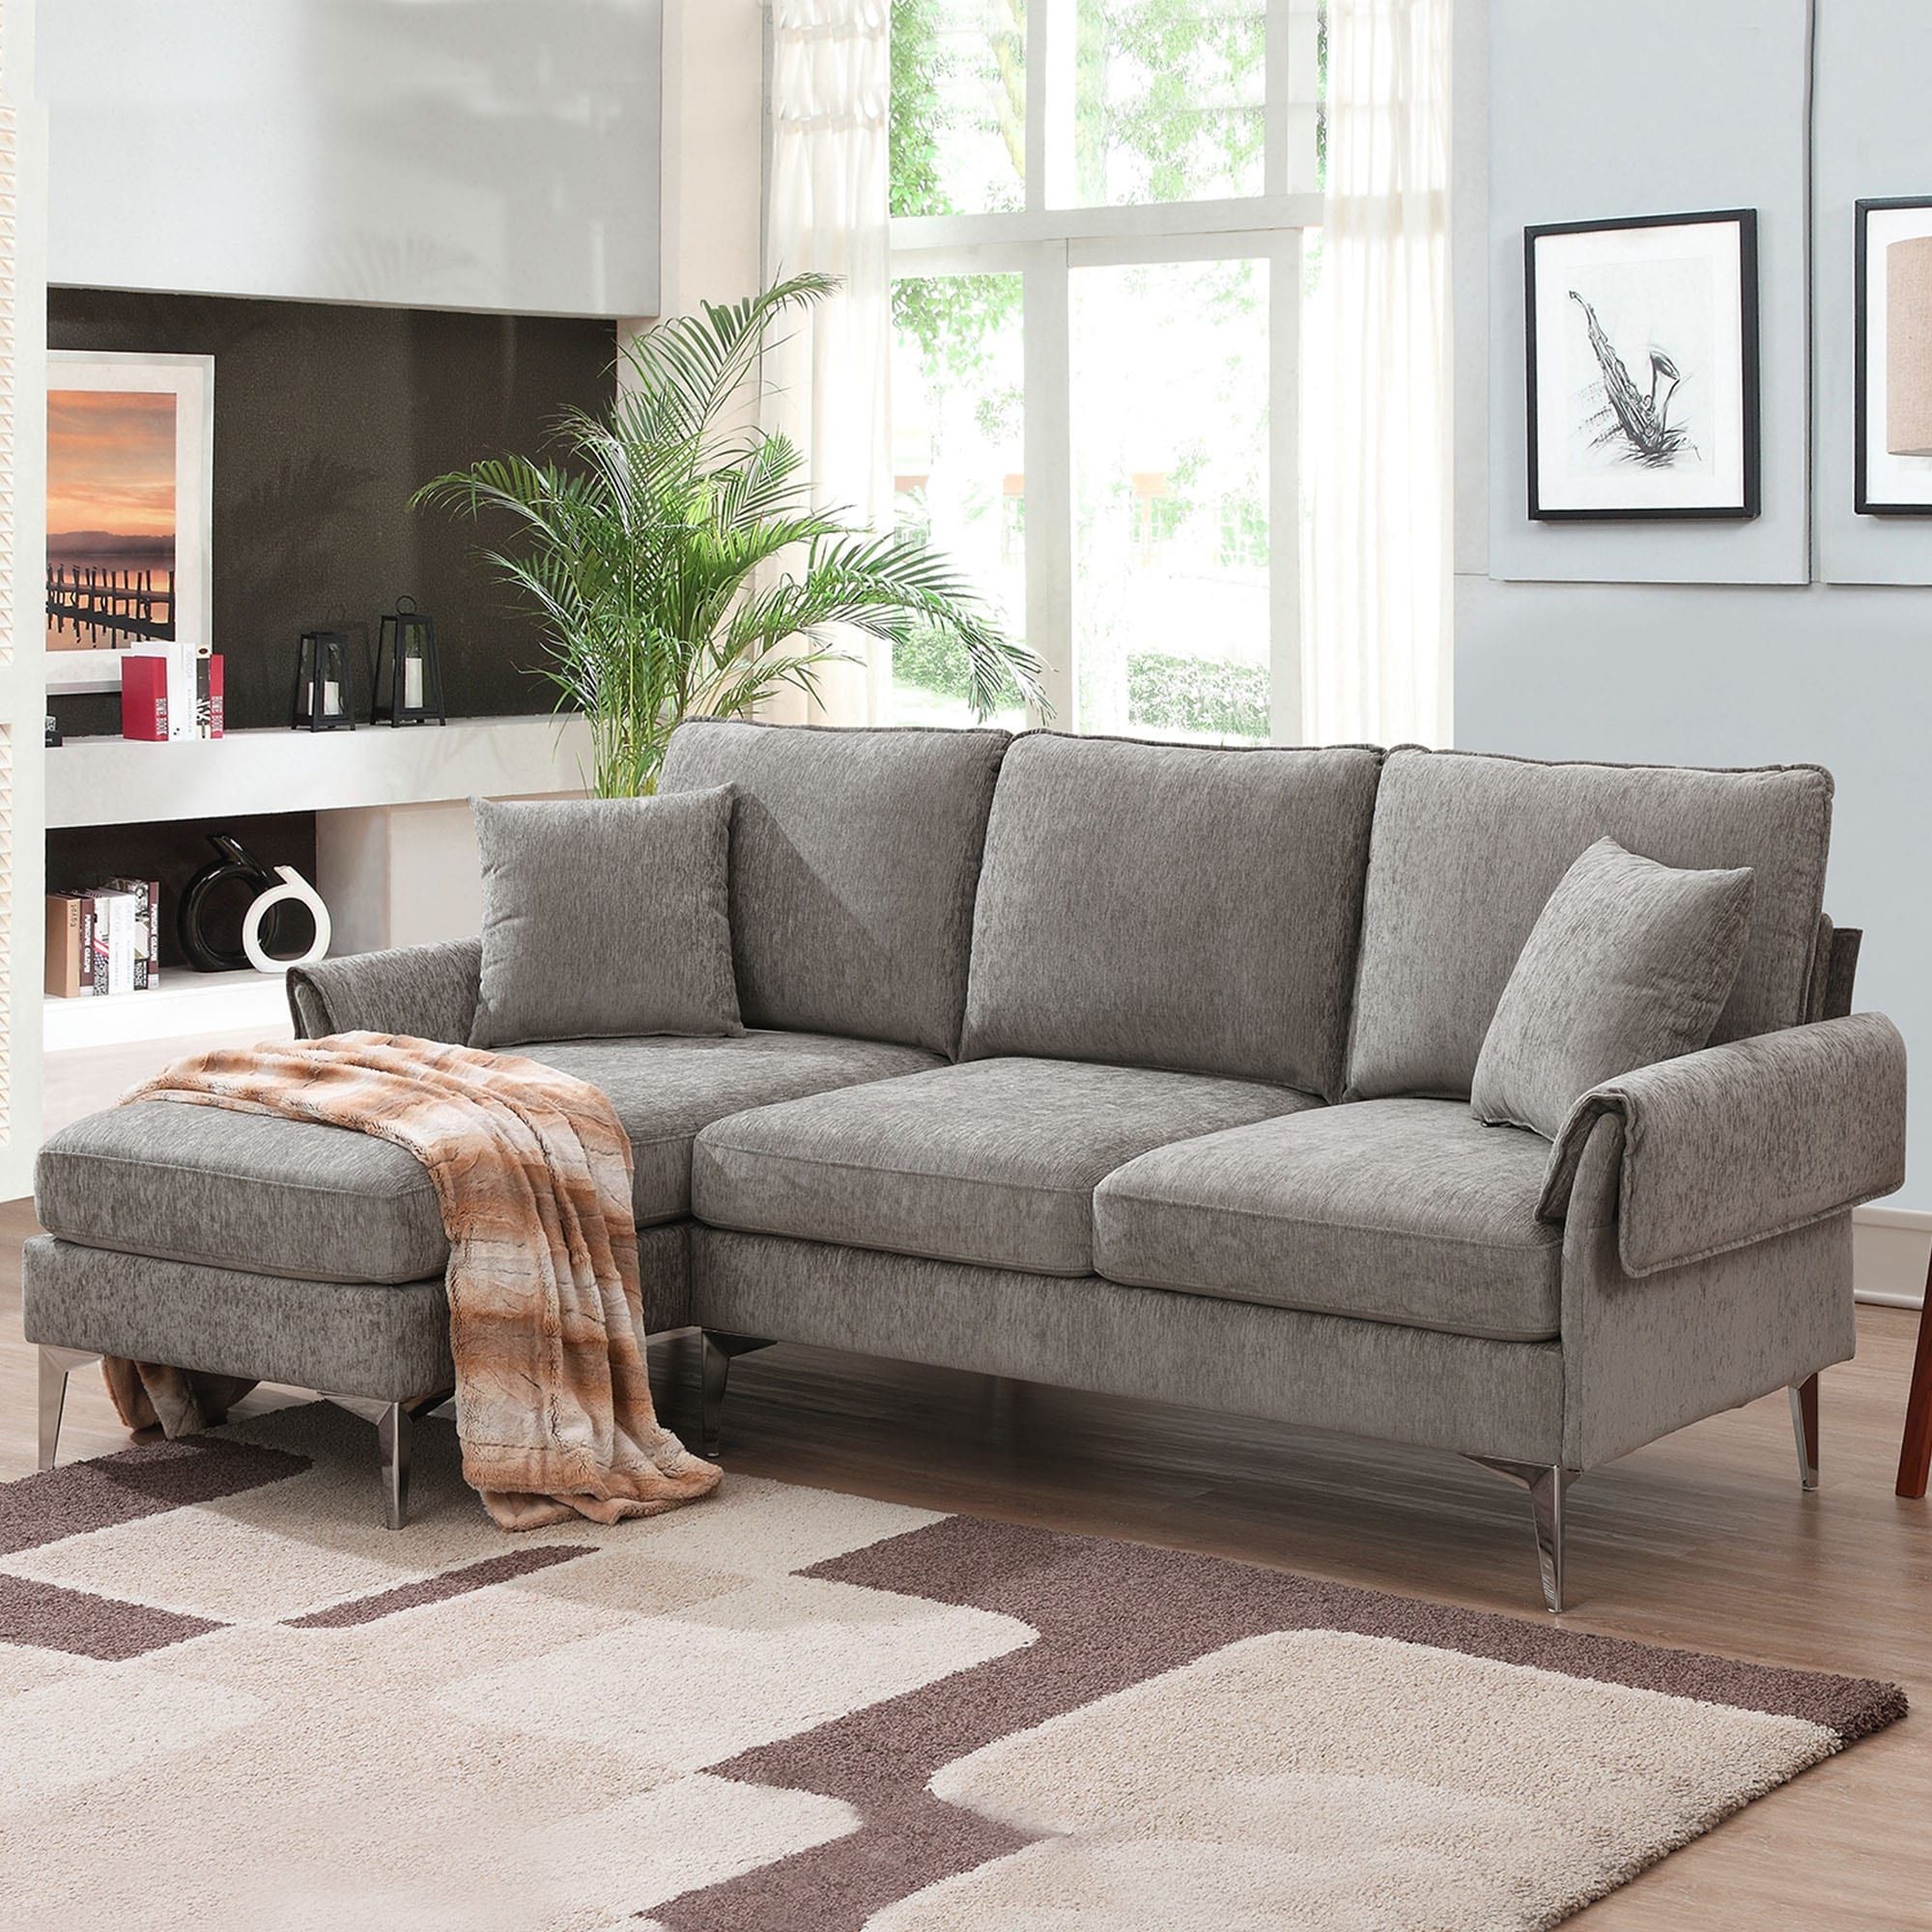 Modern Convertible Sectional Sofa, L Shaped Couch W/reversible Chaise And 2  Pillows – Bed Bath & Beyond – 37256829 With Convertible L Shaped Sectional Sofas (View 13 of 15)